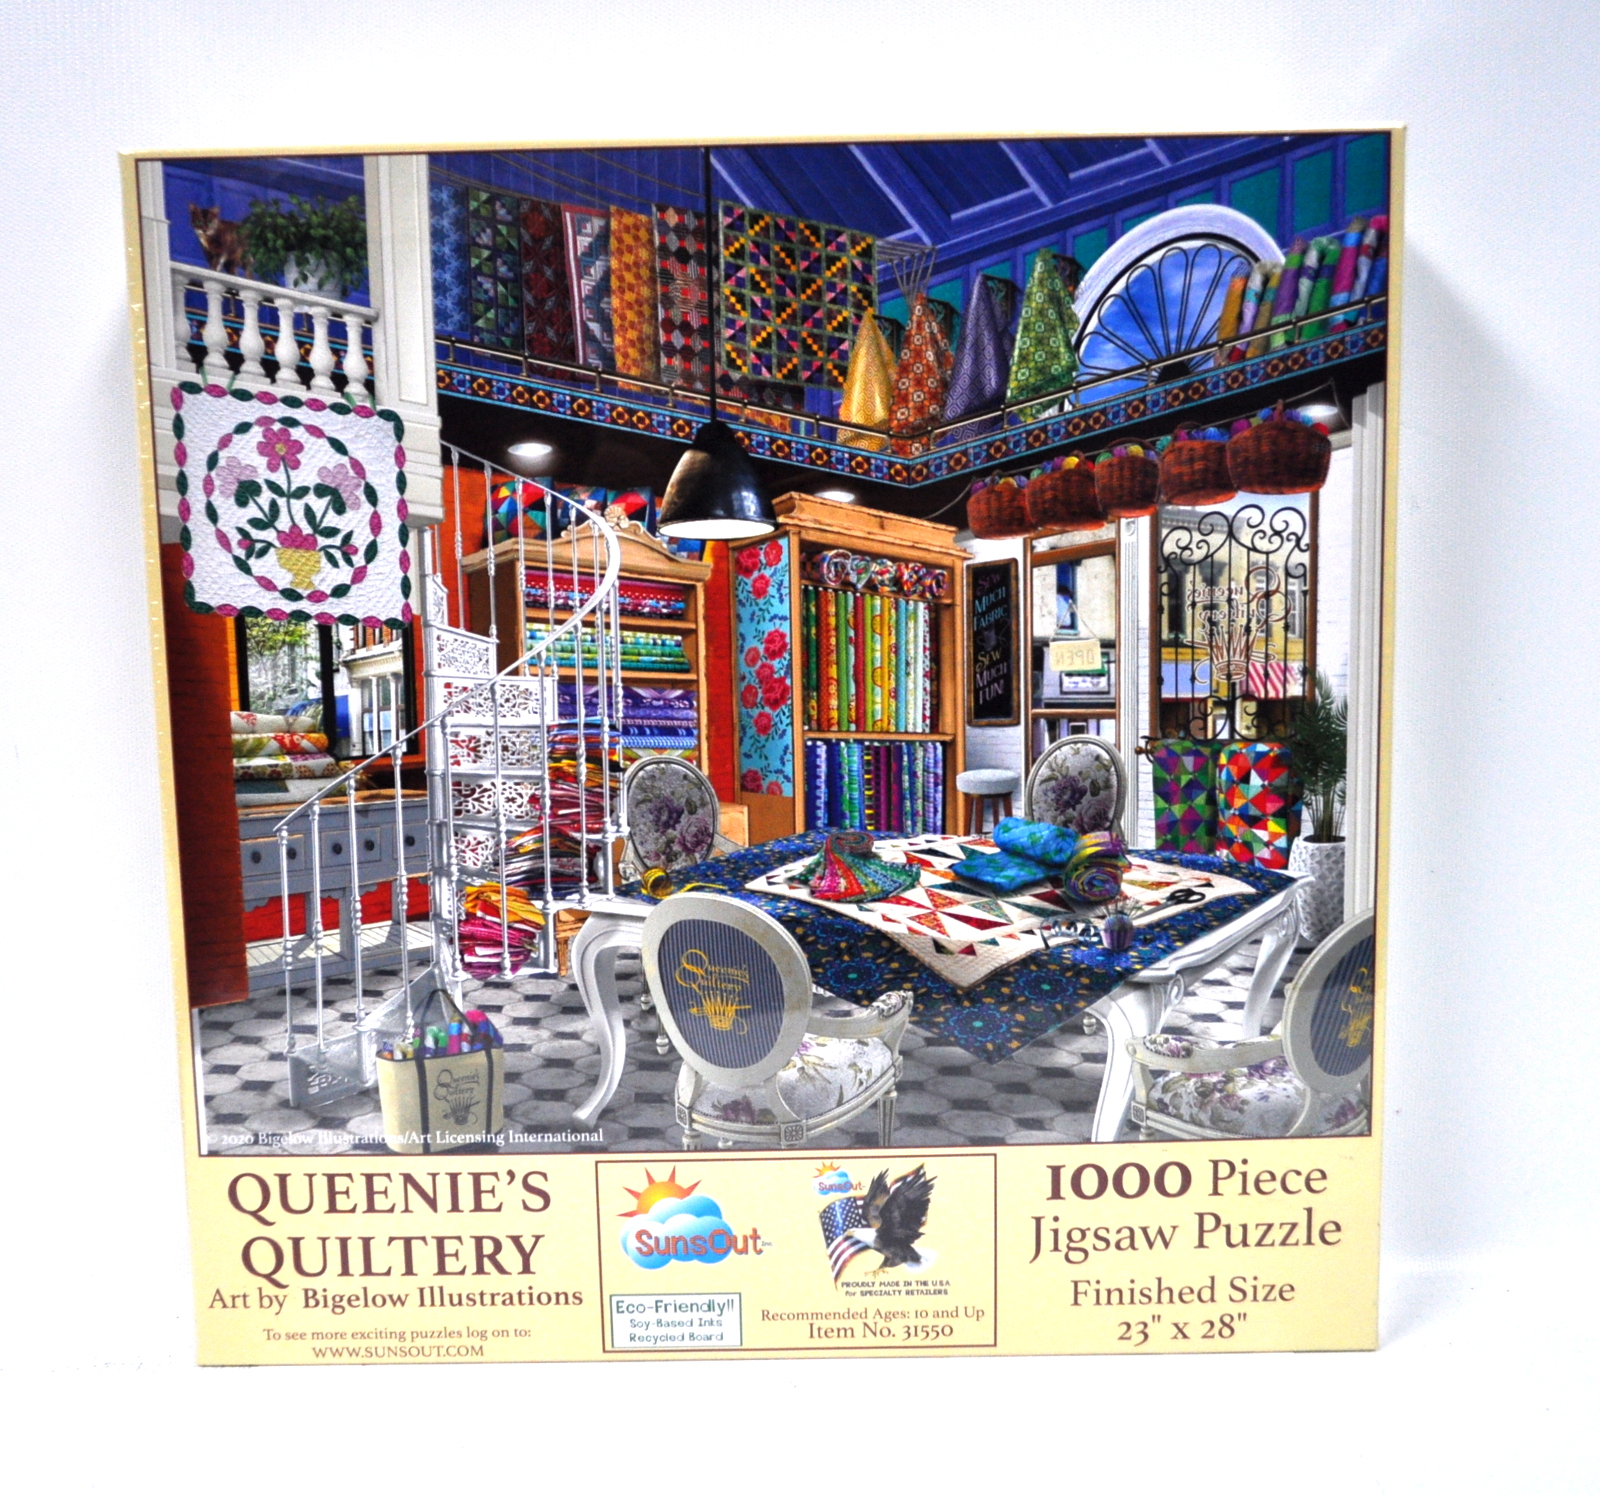 sunsout inc queenie's quiltery 1000 pc jigsaw puzzle